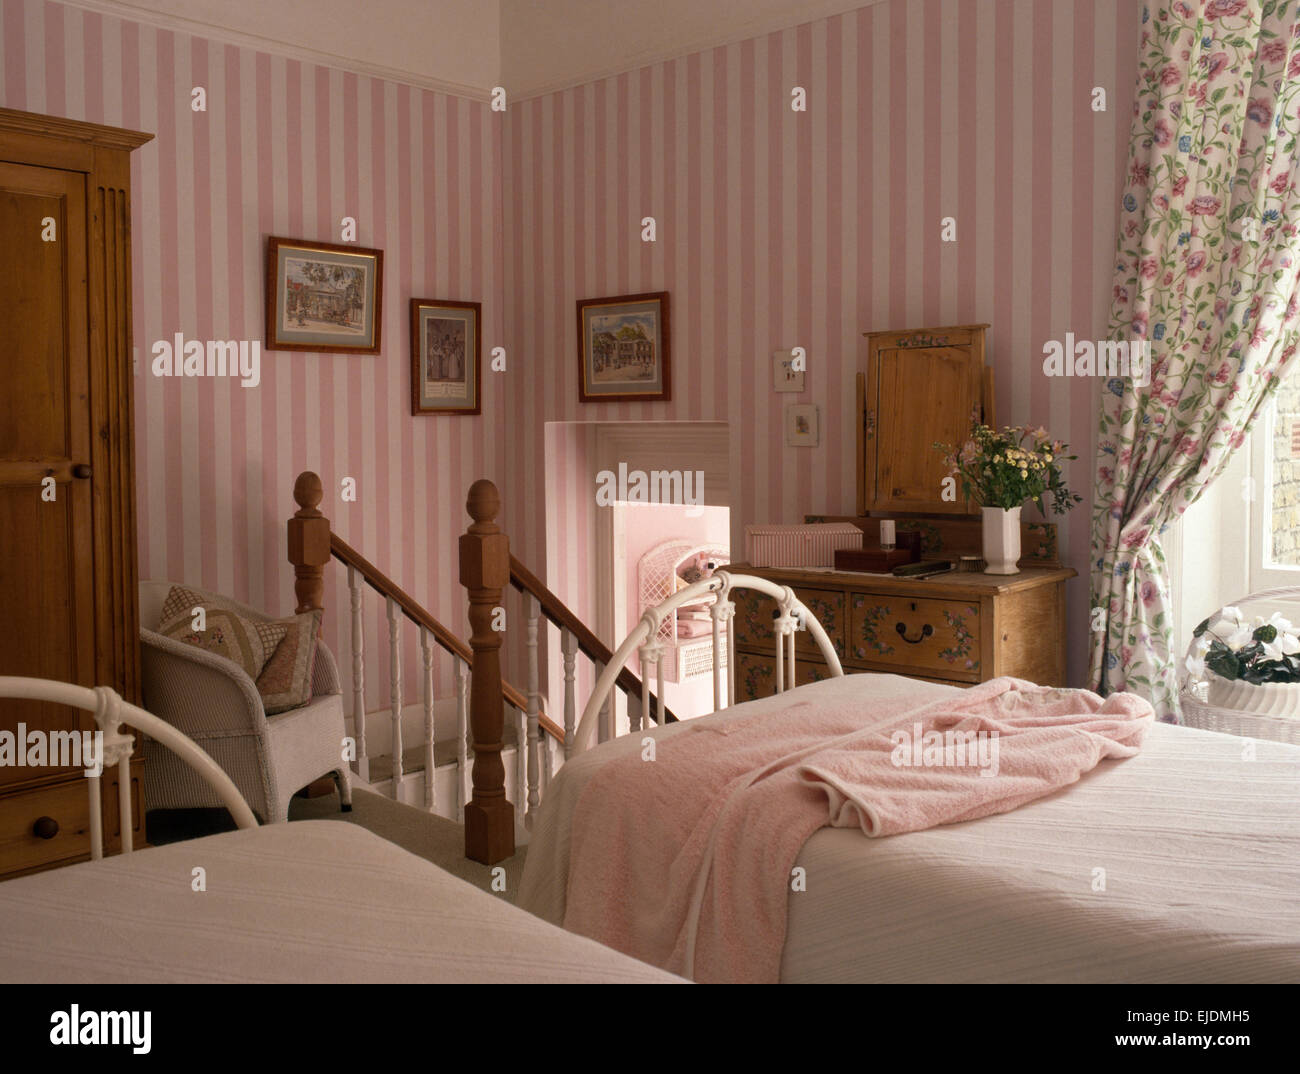 Pink striped wallpaper in country bedroom with white wrought iron twin beds Stock Photo